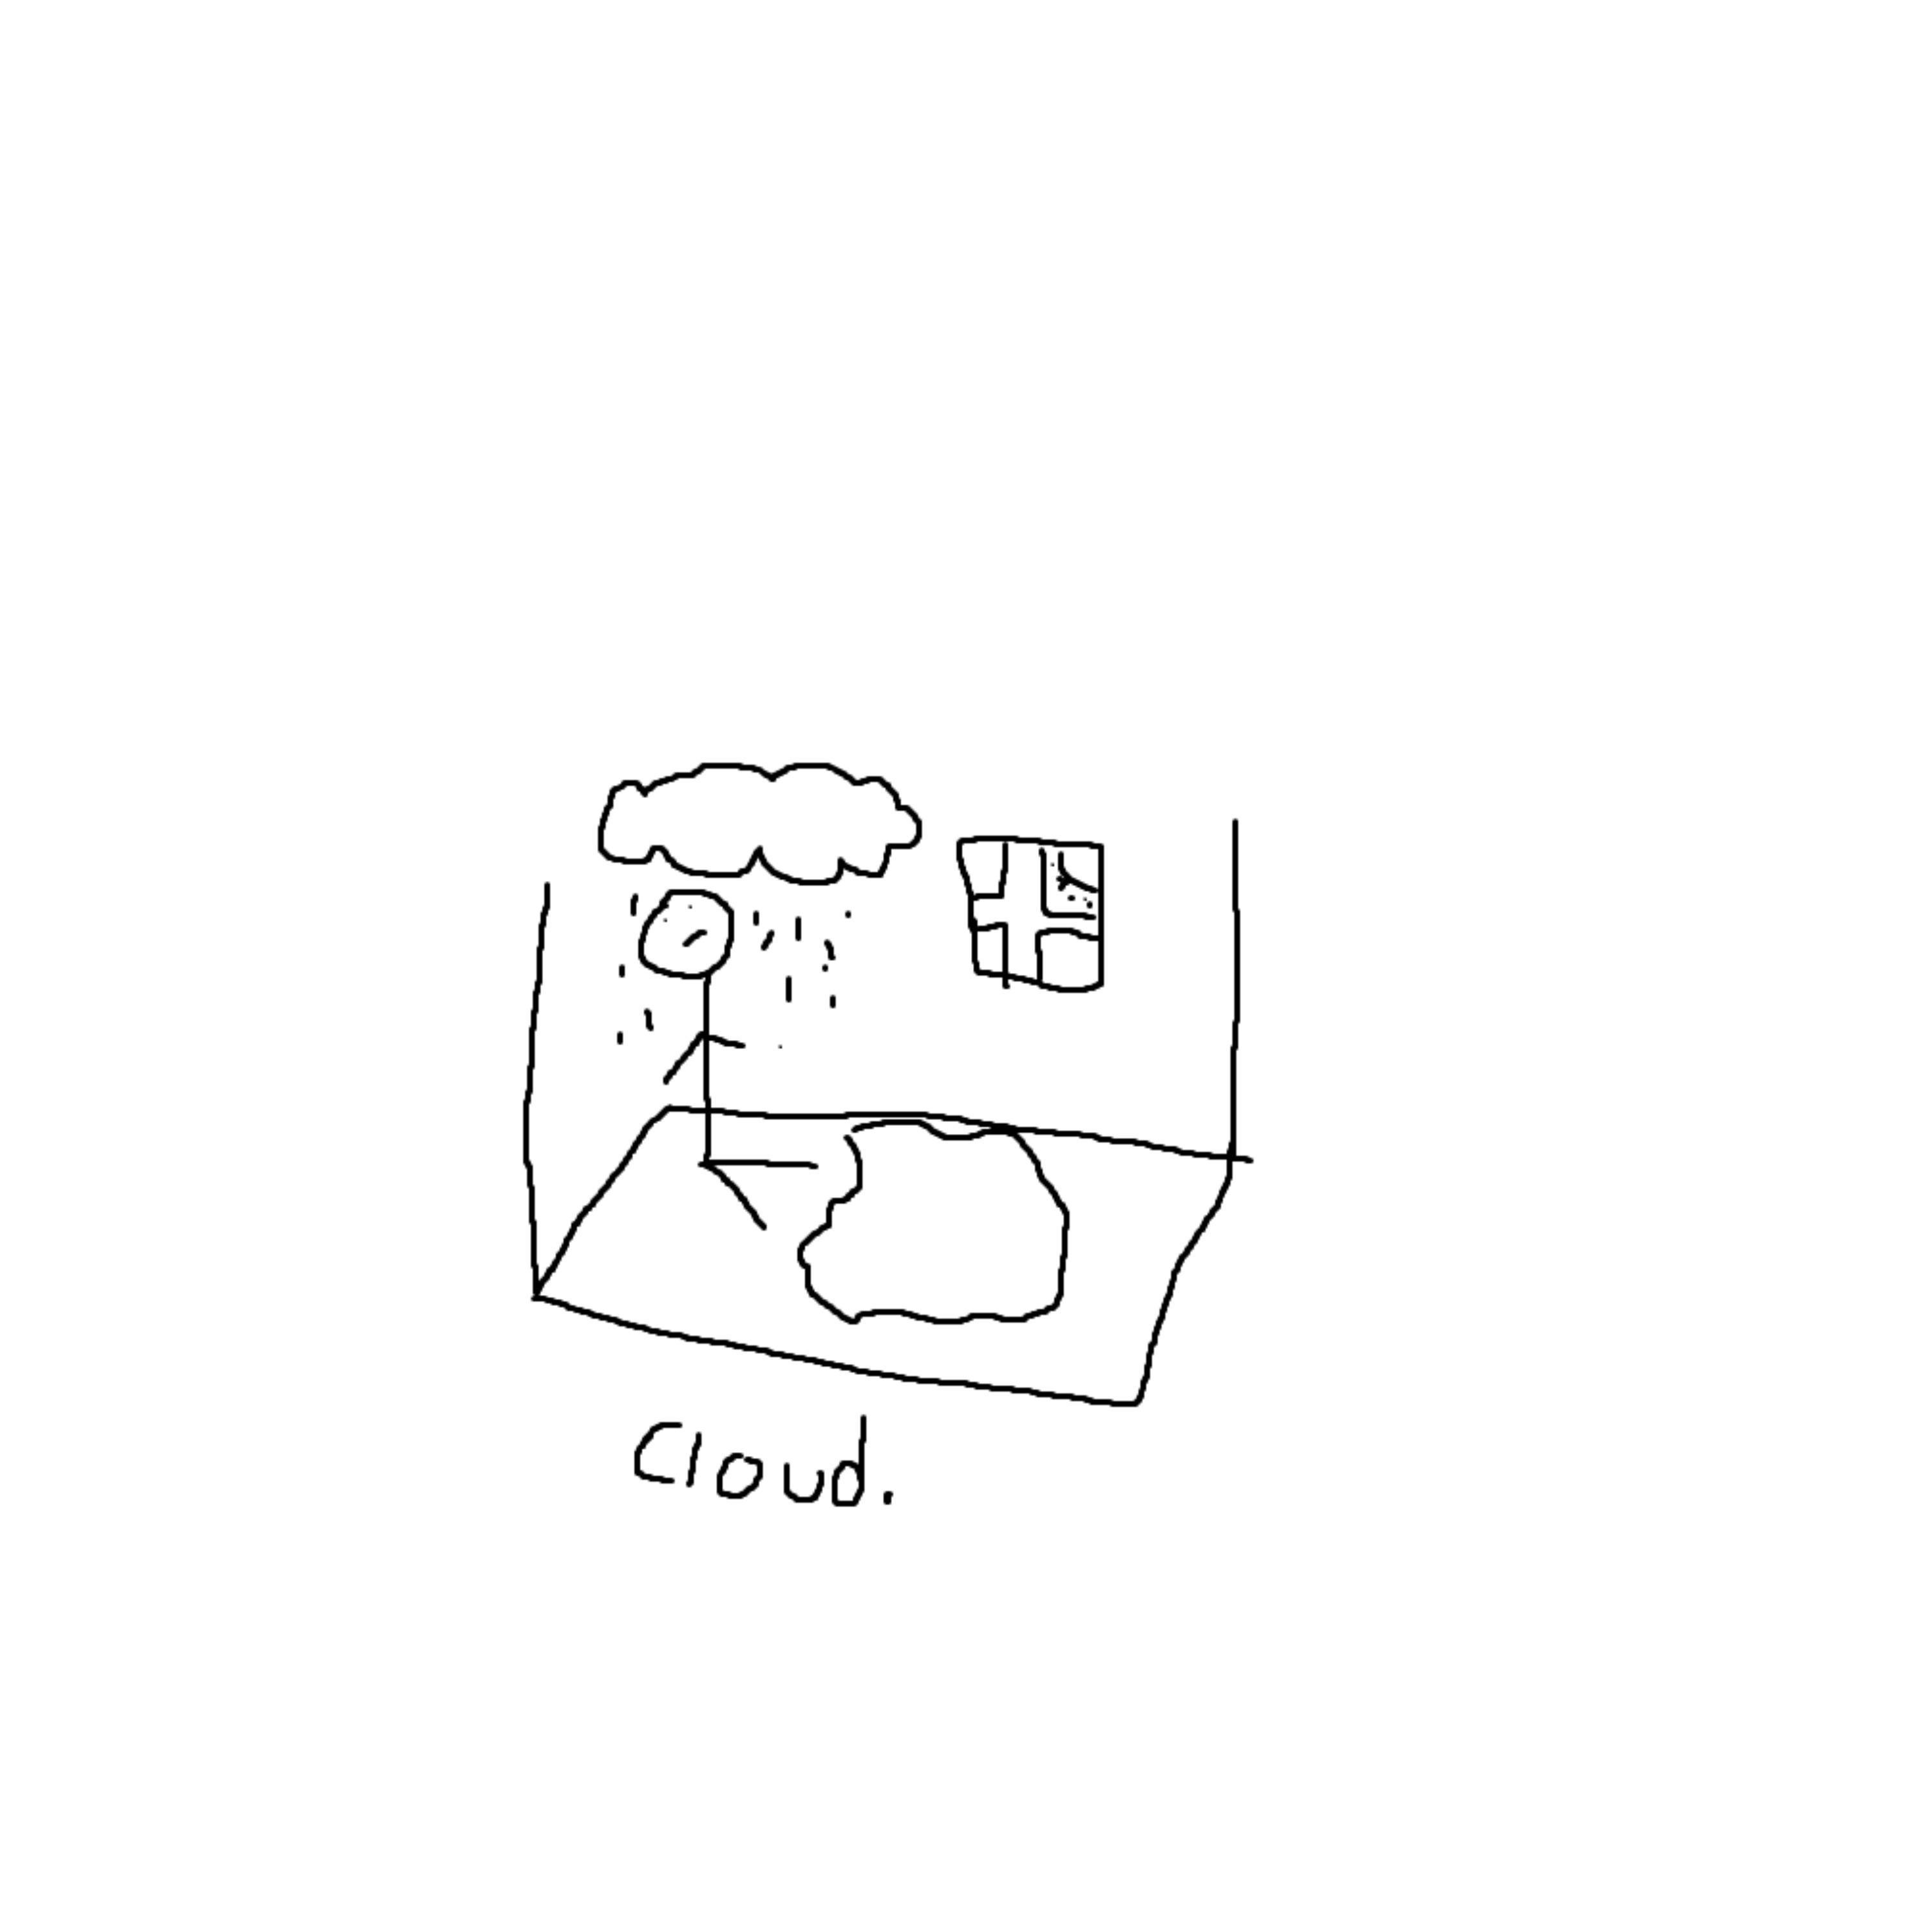 Enoc - Laying on a cloud.